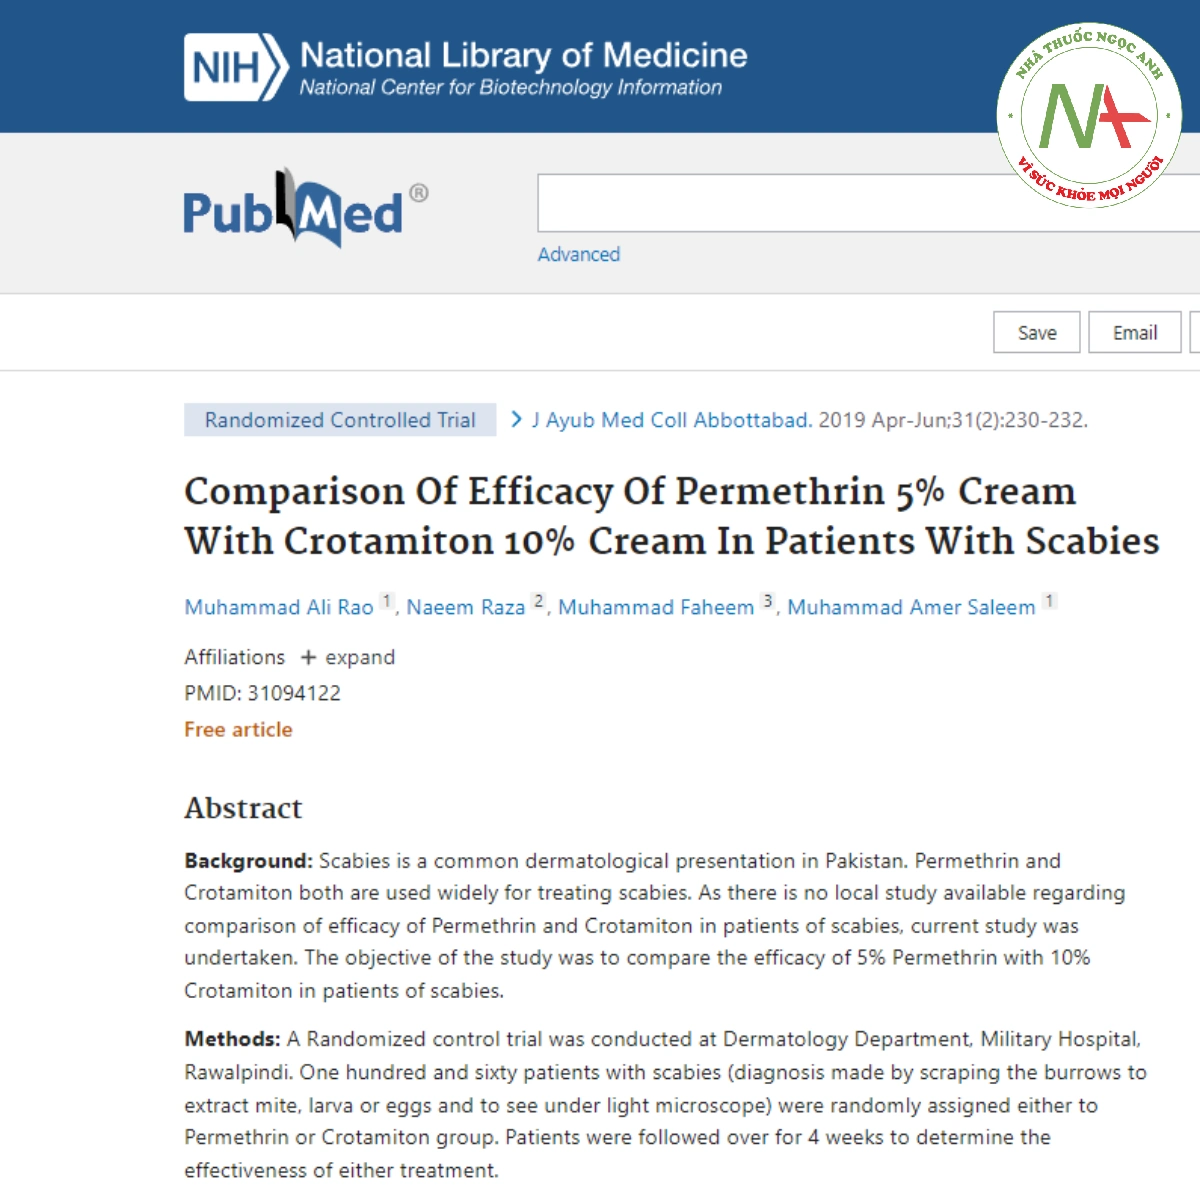 Comparison Of Efficacy Of Permethrin 5% Cream With Crotamiton 10% Cream In Patients With Scabies (1)